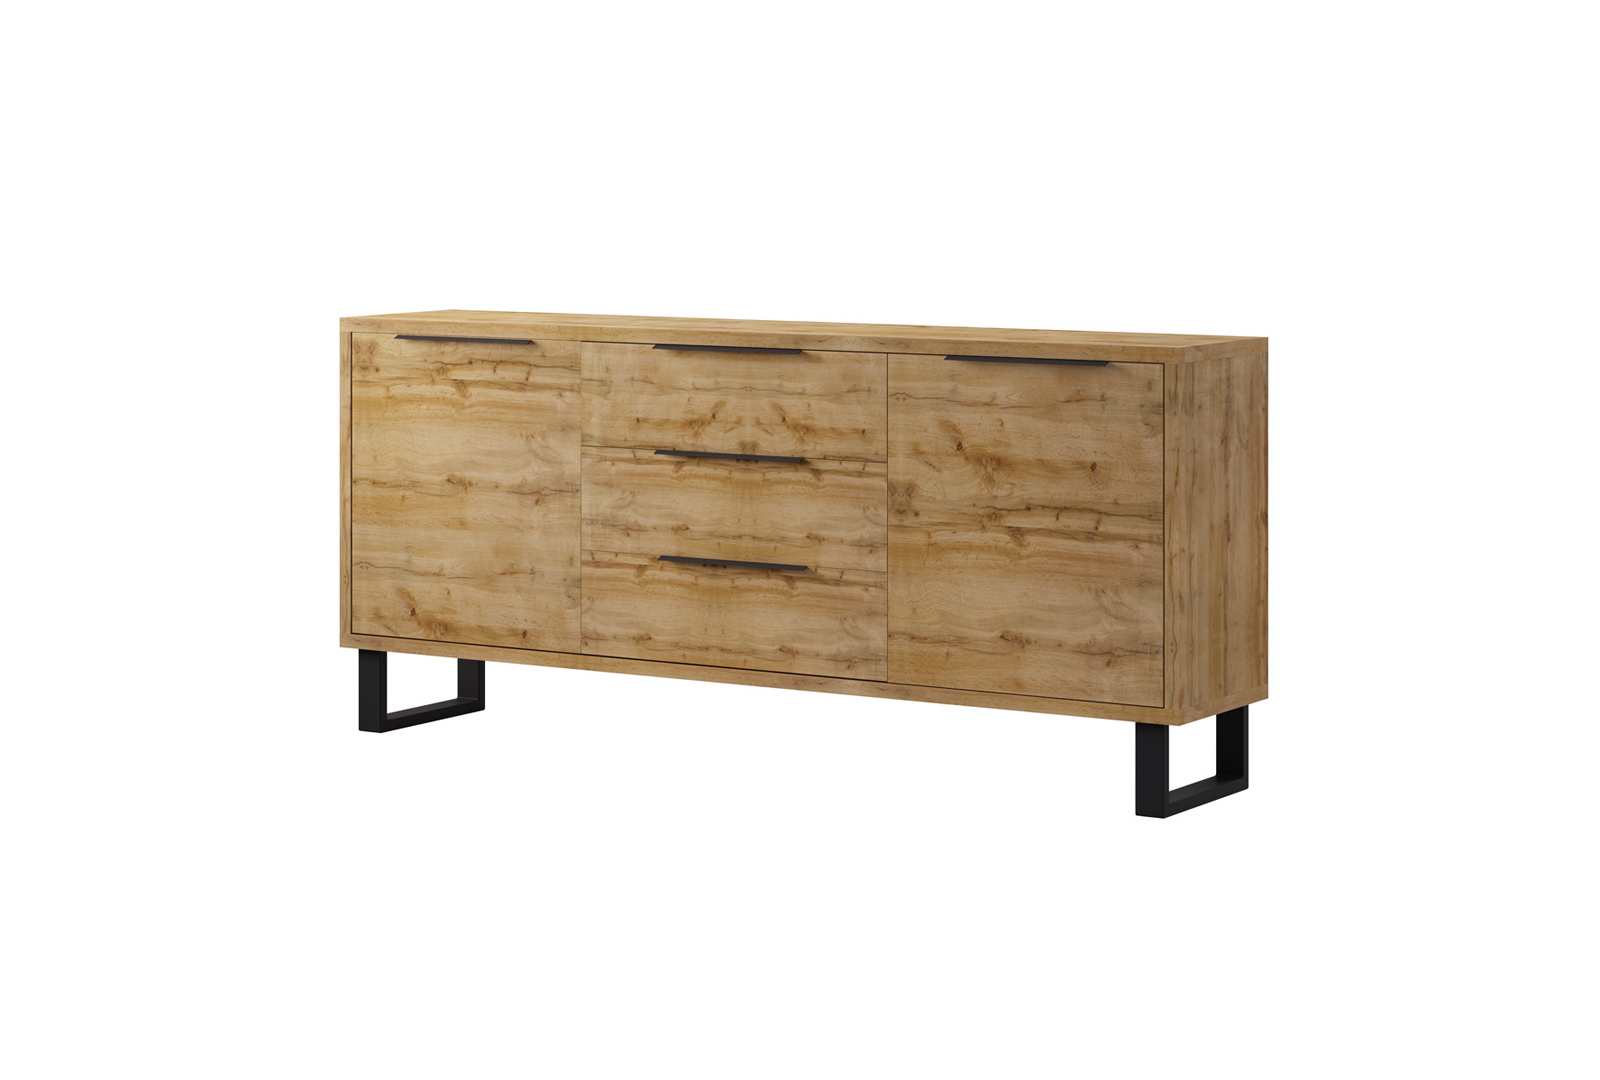 HALLE CHEST OF DRAWERS TYPE 25